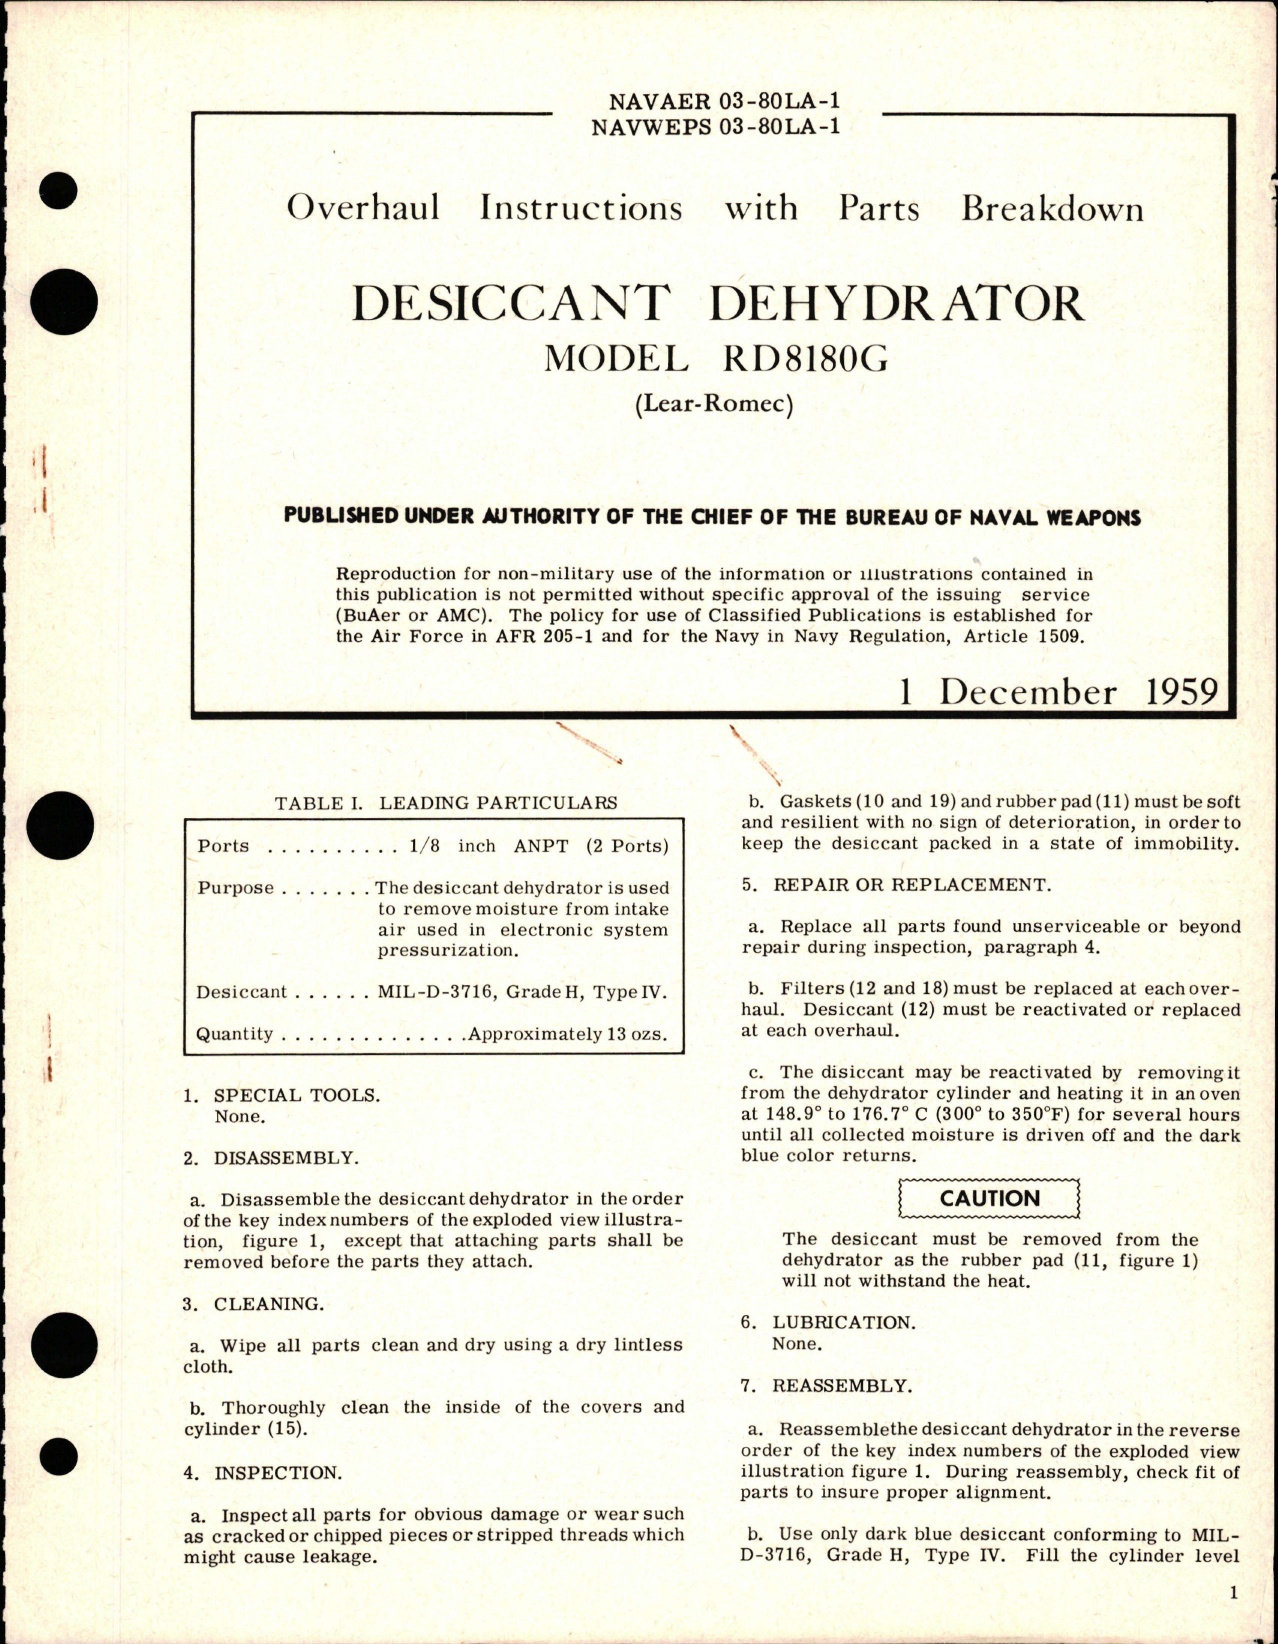 Sample page 1 from AirCorps Library document: Overhaul Instructions with Parts Breakdown for Desiccant Dehydrator - Model RD8180G 